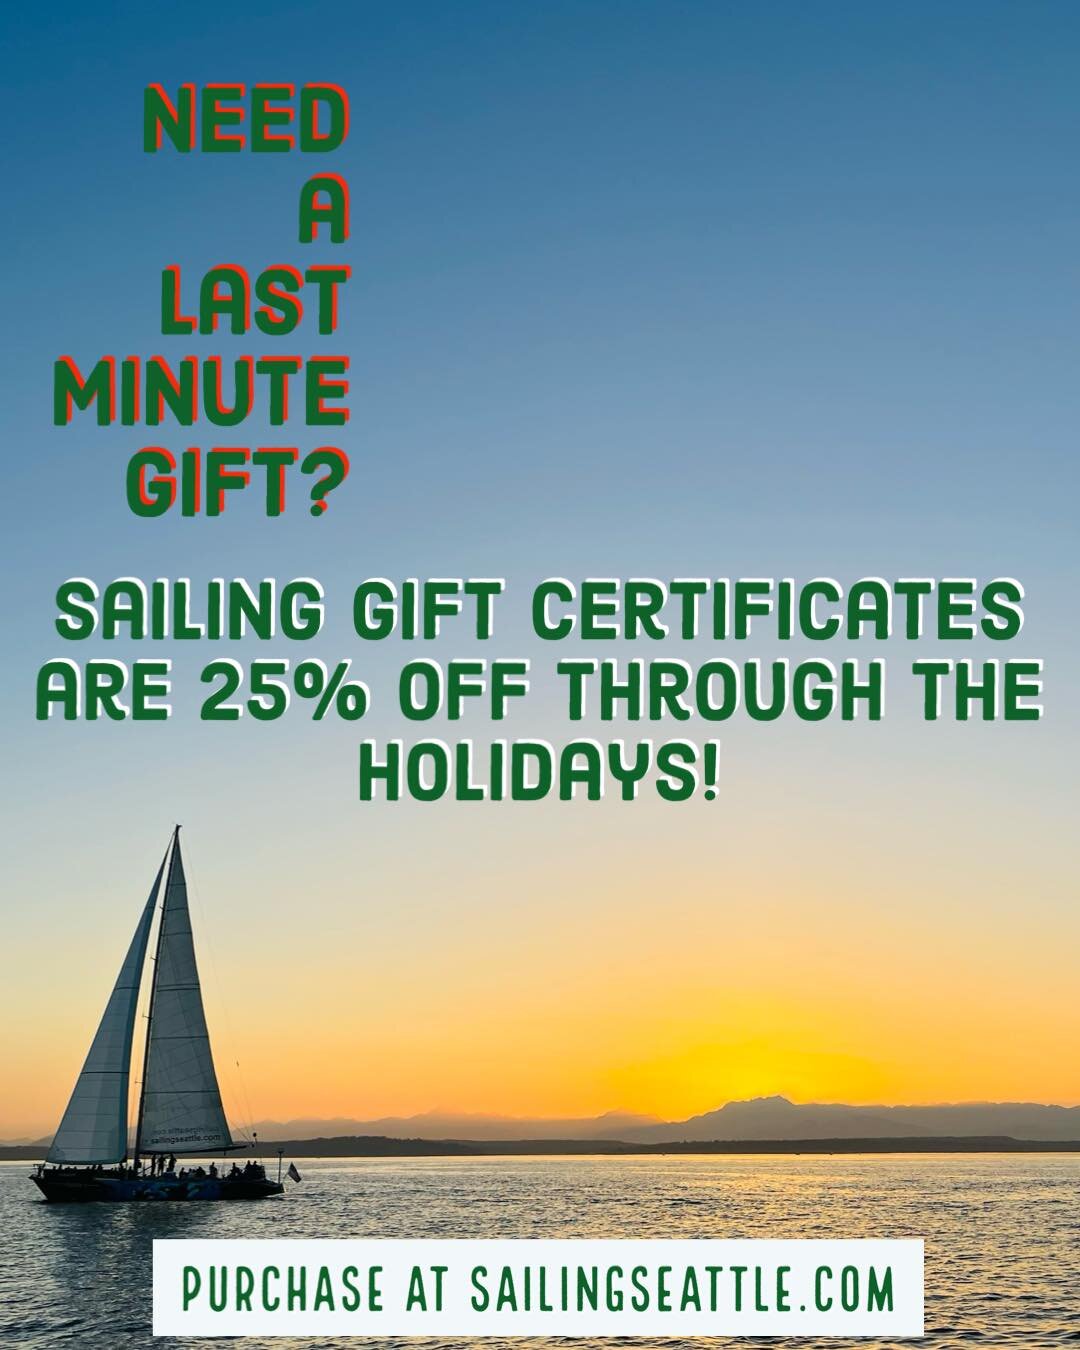 Just a reminder that sailing gift certificates are 25% off through Dec 31st. The perfect present for the boater in your life. And a great way to look forward to summer weather on Puget Sound! Purchase at sailingseattle.com